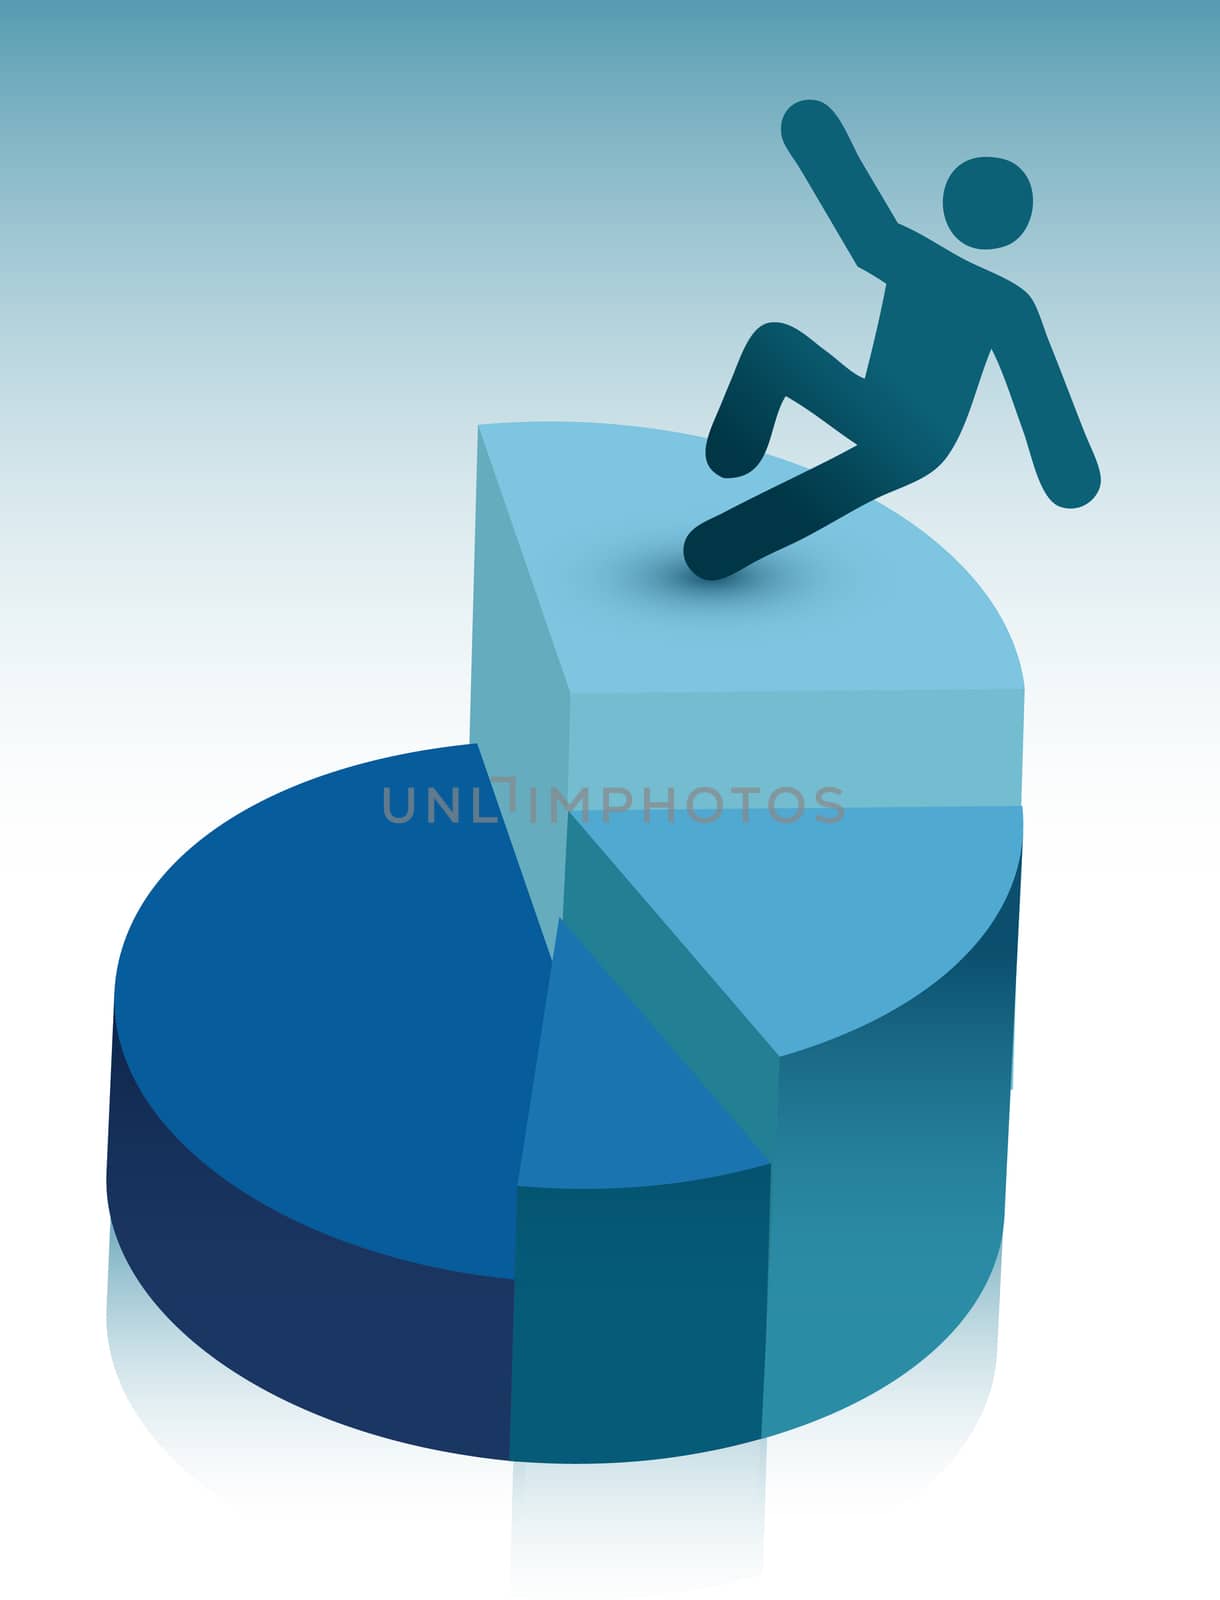 falling from pie chart illustration